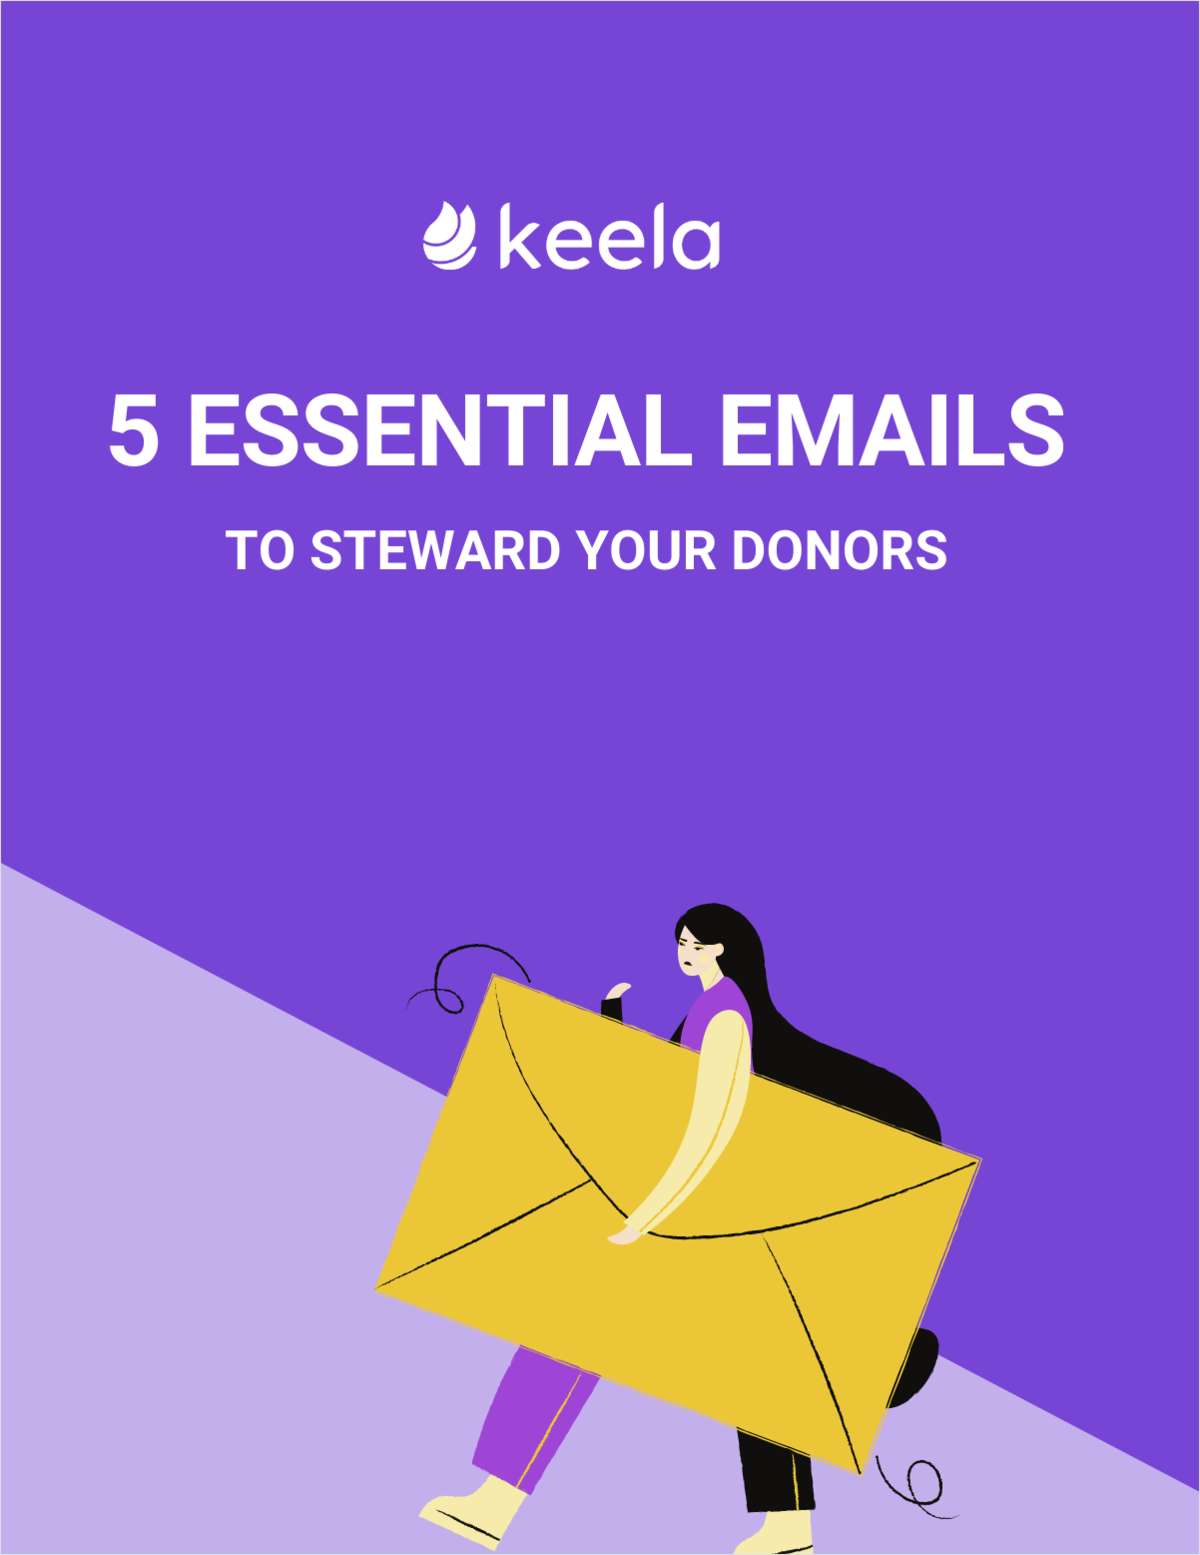 5 Essential Email Templates To Steward your Donors